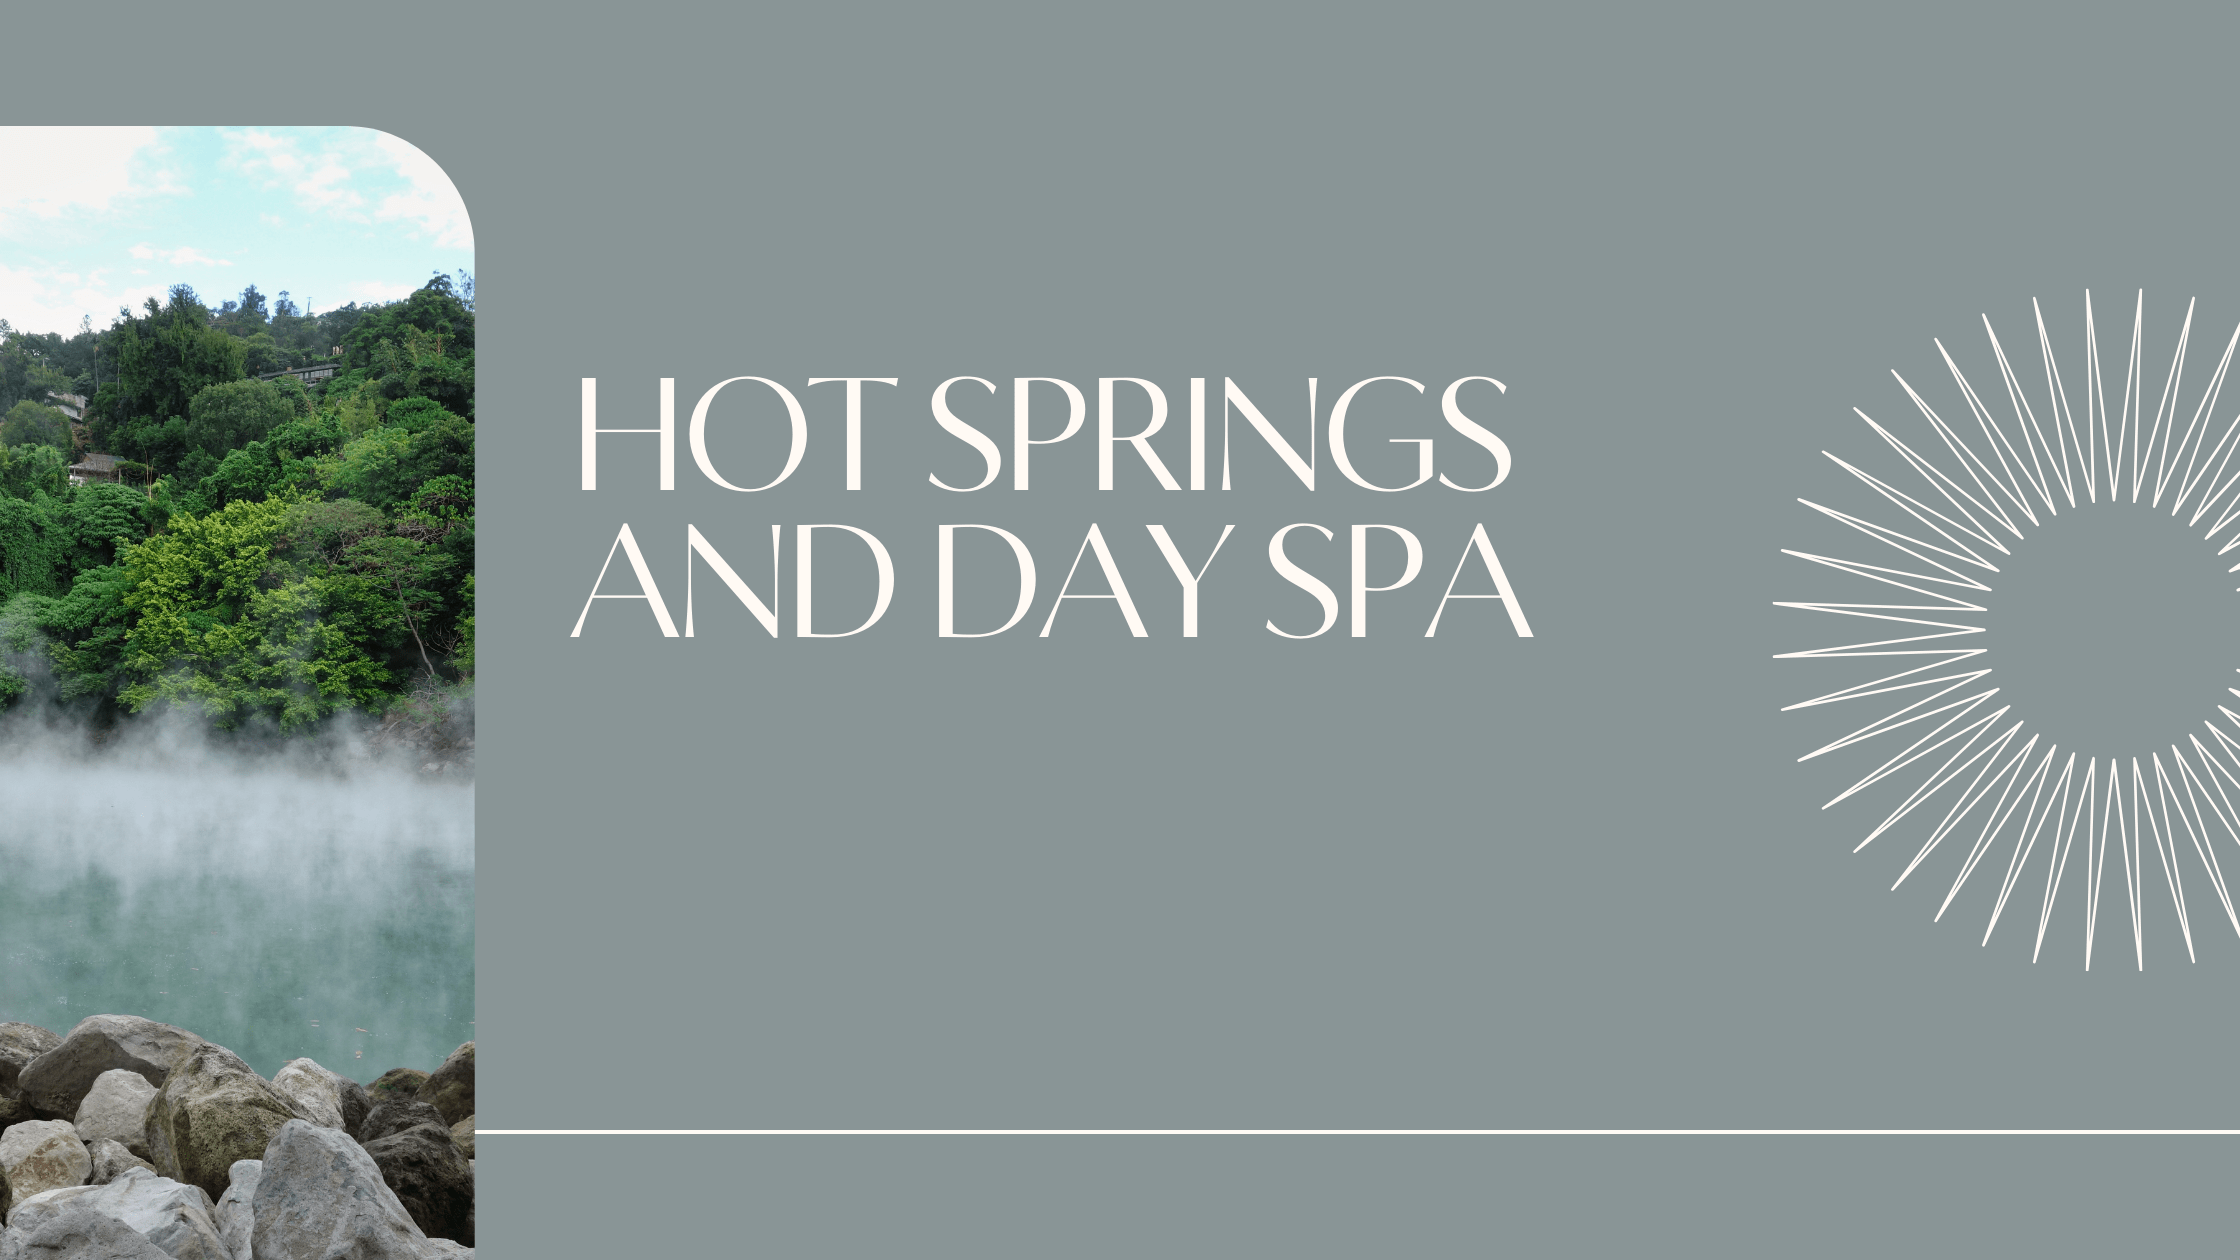 Hot Springs and Day Spa